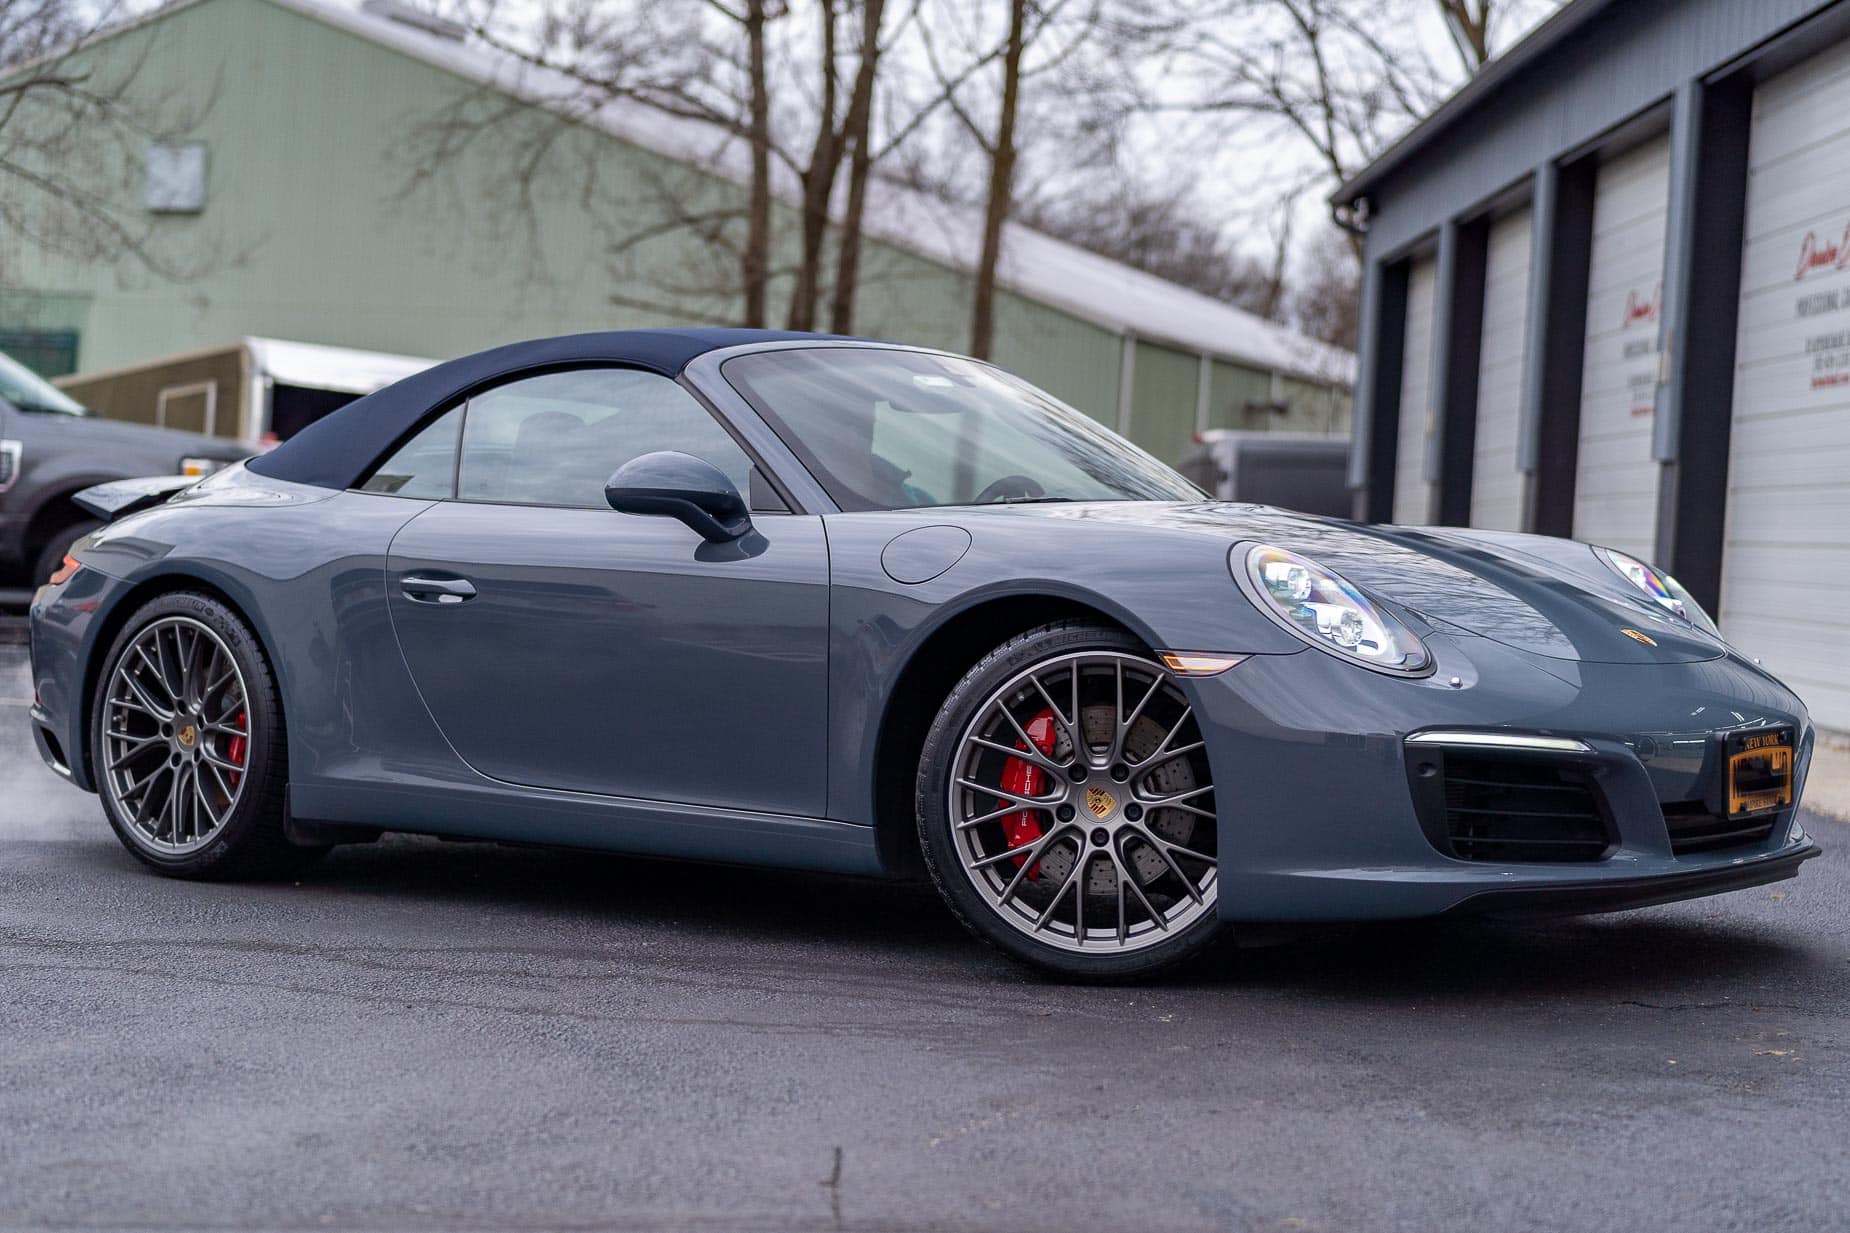 2018 Porsche 911 Carrera S Cabriolet Graphite Blue Metallic Convertible Spider Wheels Red Calipers Navy Blue Top Xpel Paint Protection Film Ppf Ceramic Coating0A 12